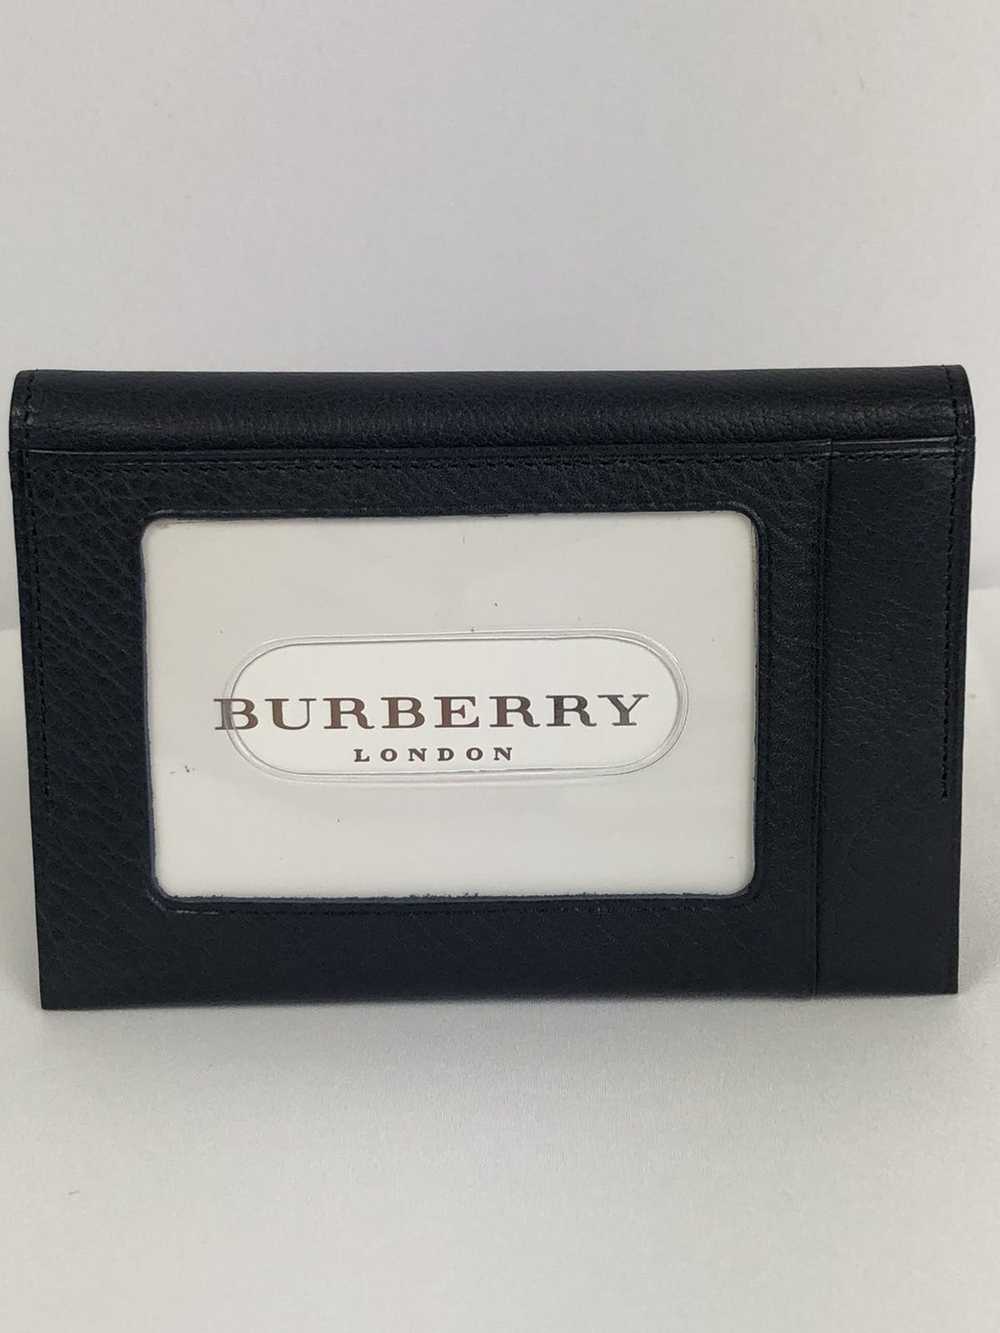 Burberry Business Card Holder 4074466 Brown Leather Plaid Case Burberry  Auction